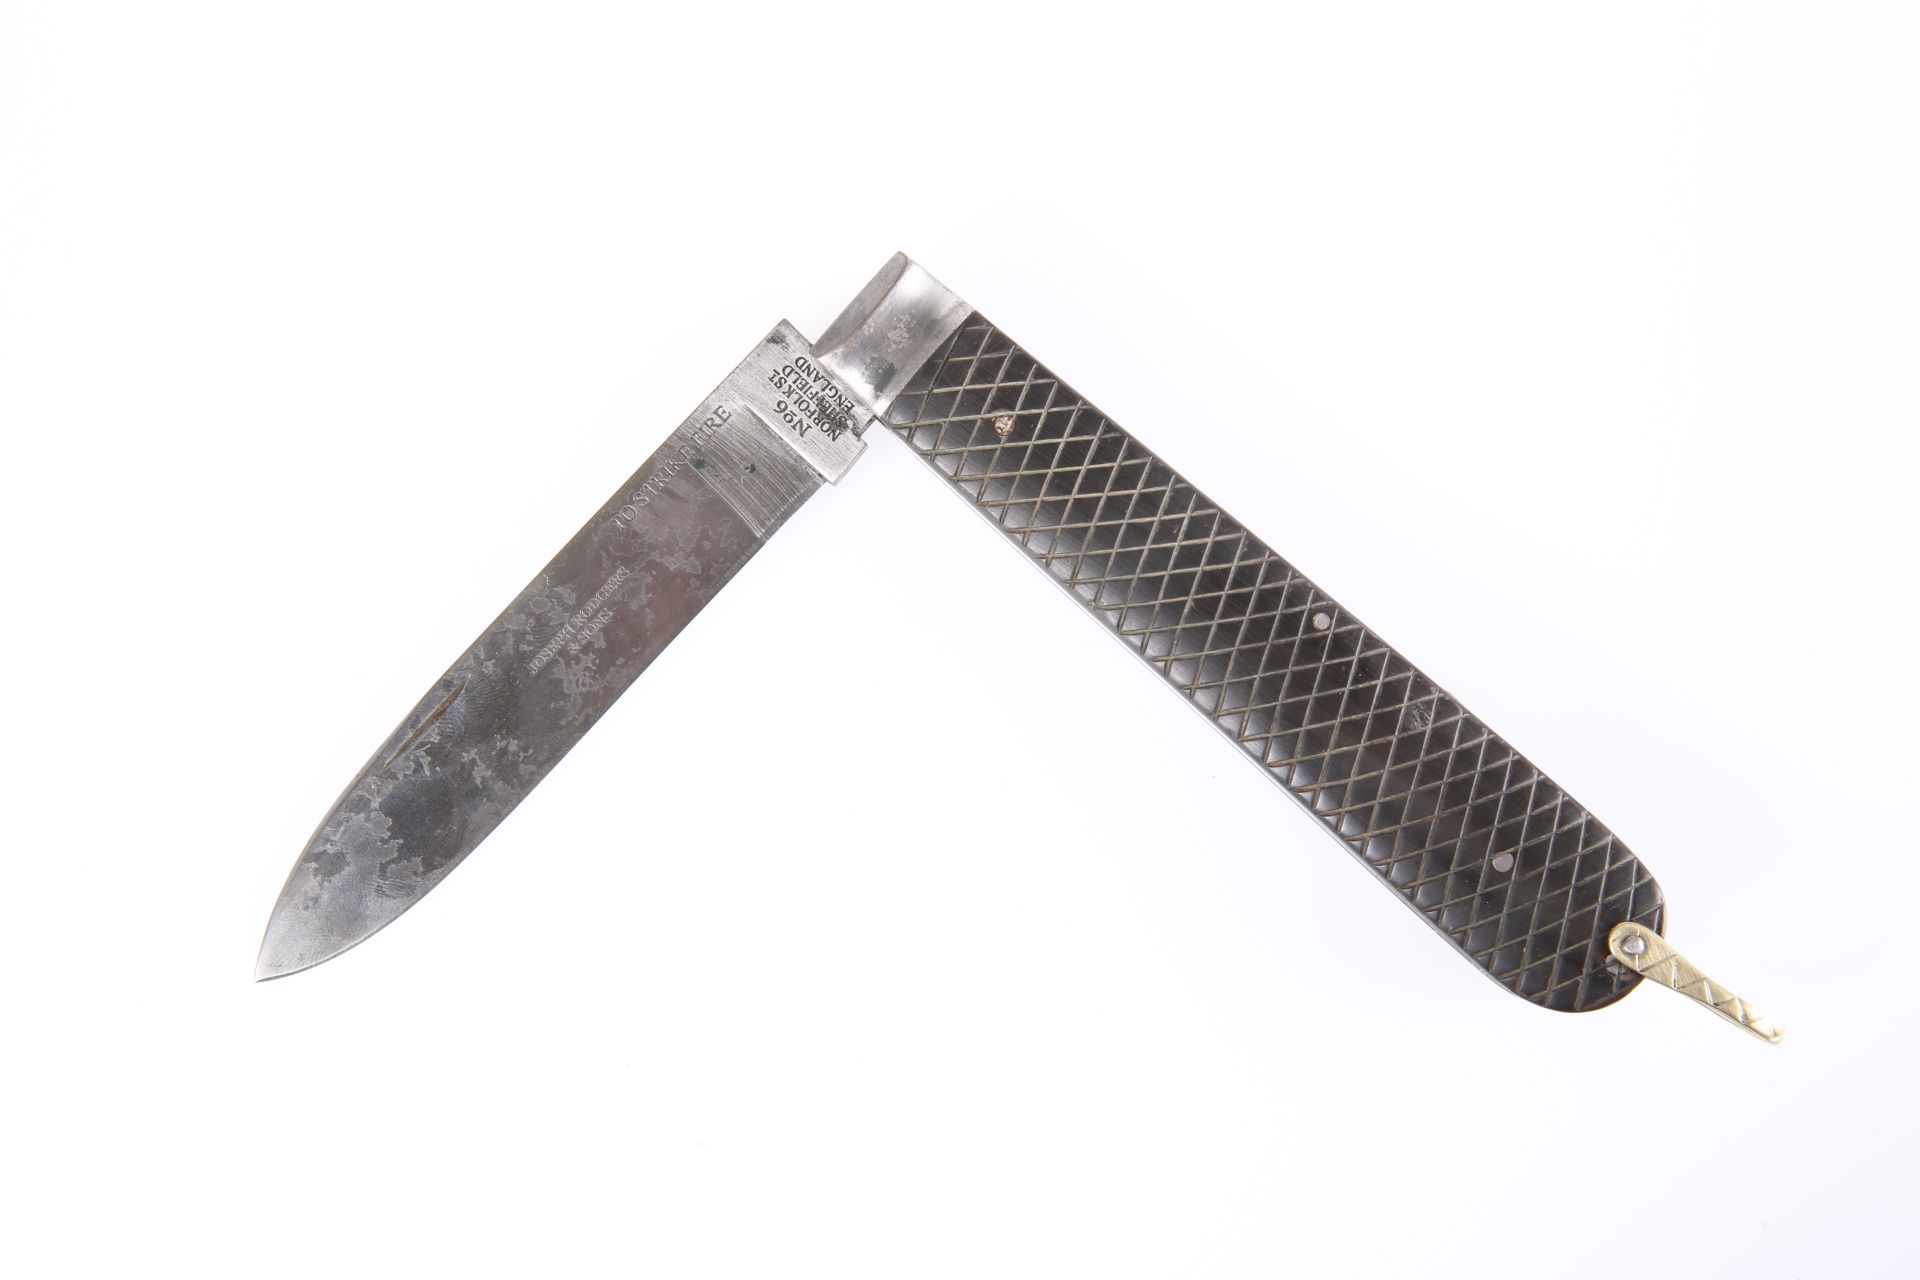 A JOSEPH RODGERS & SONS "TO STRIKE FIRE" FOLDING HUNTING KNIFE, LATE 19th CENTURY